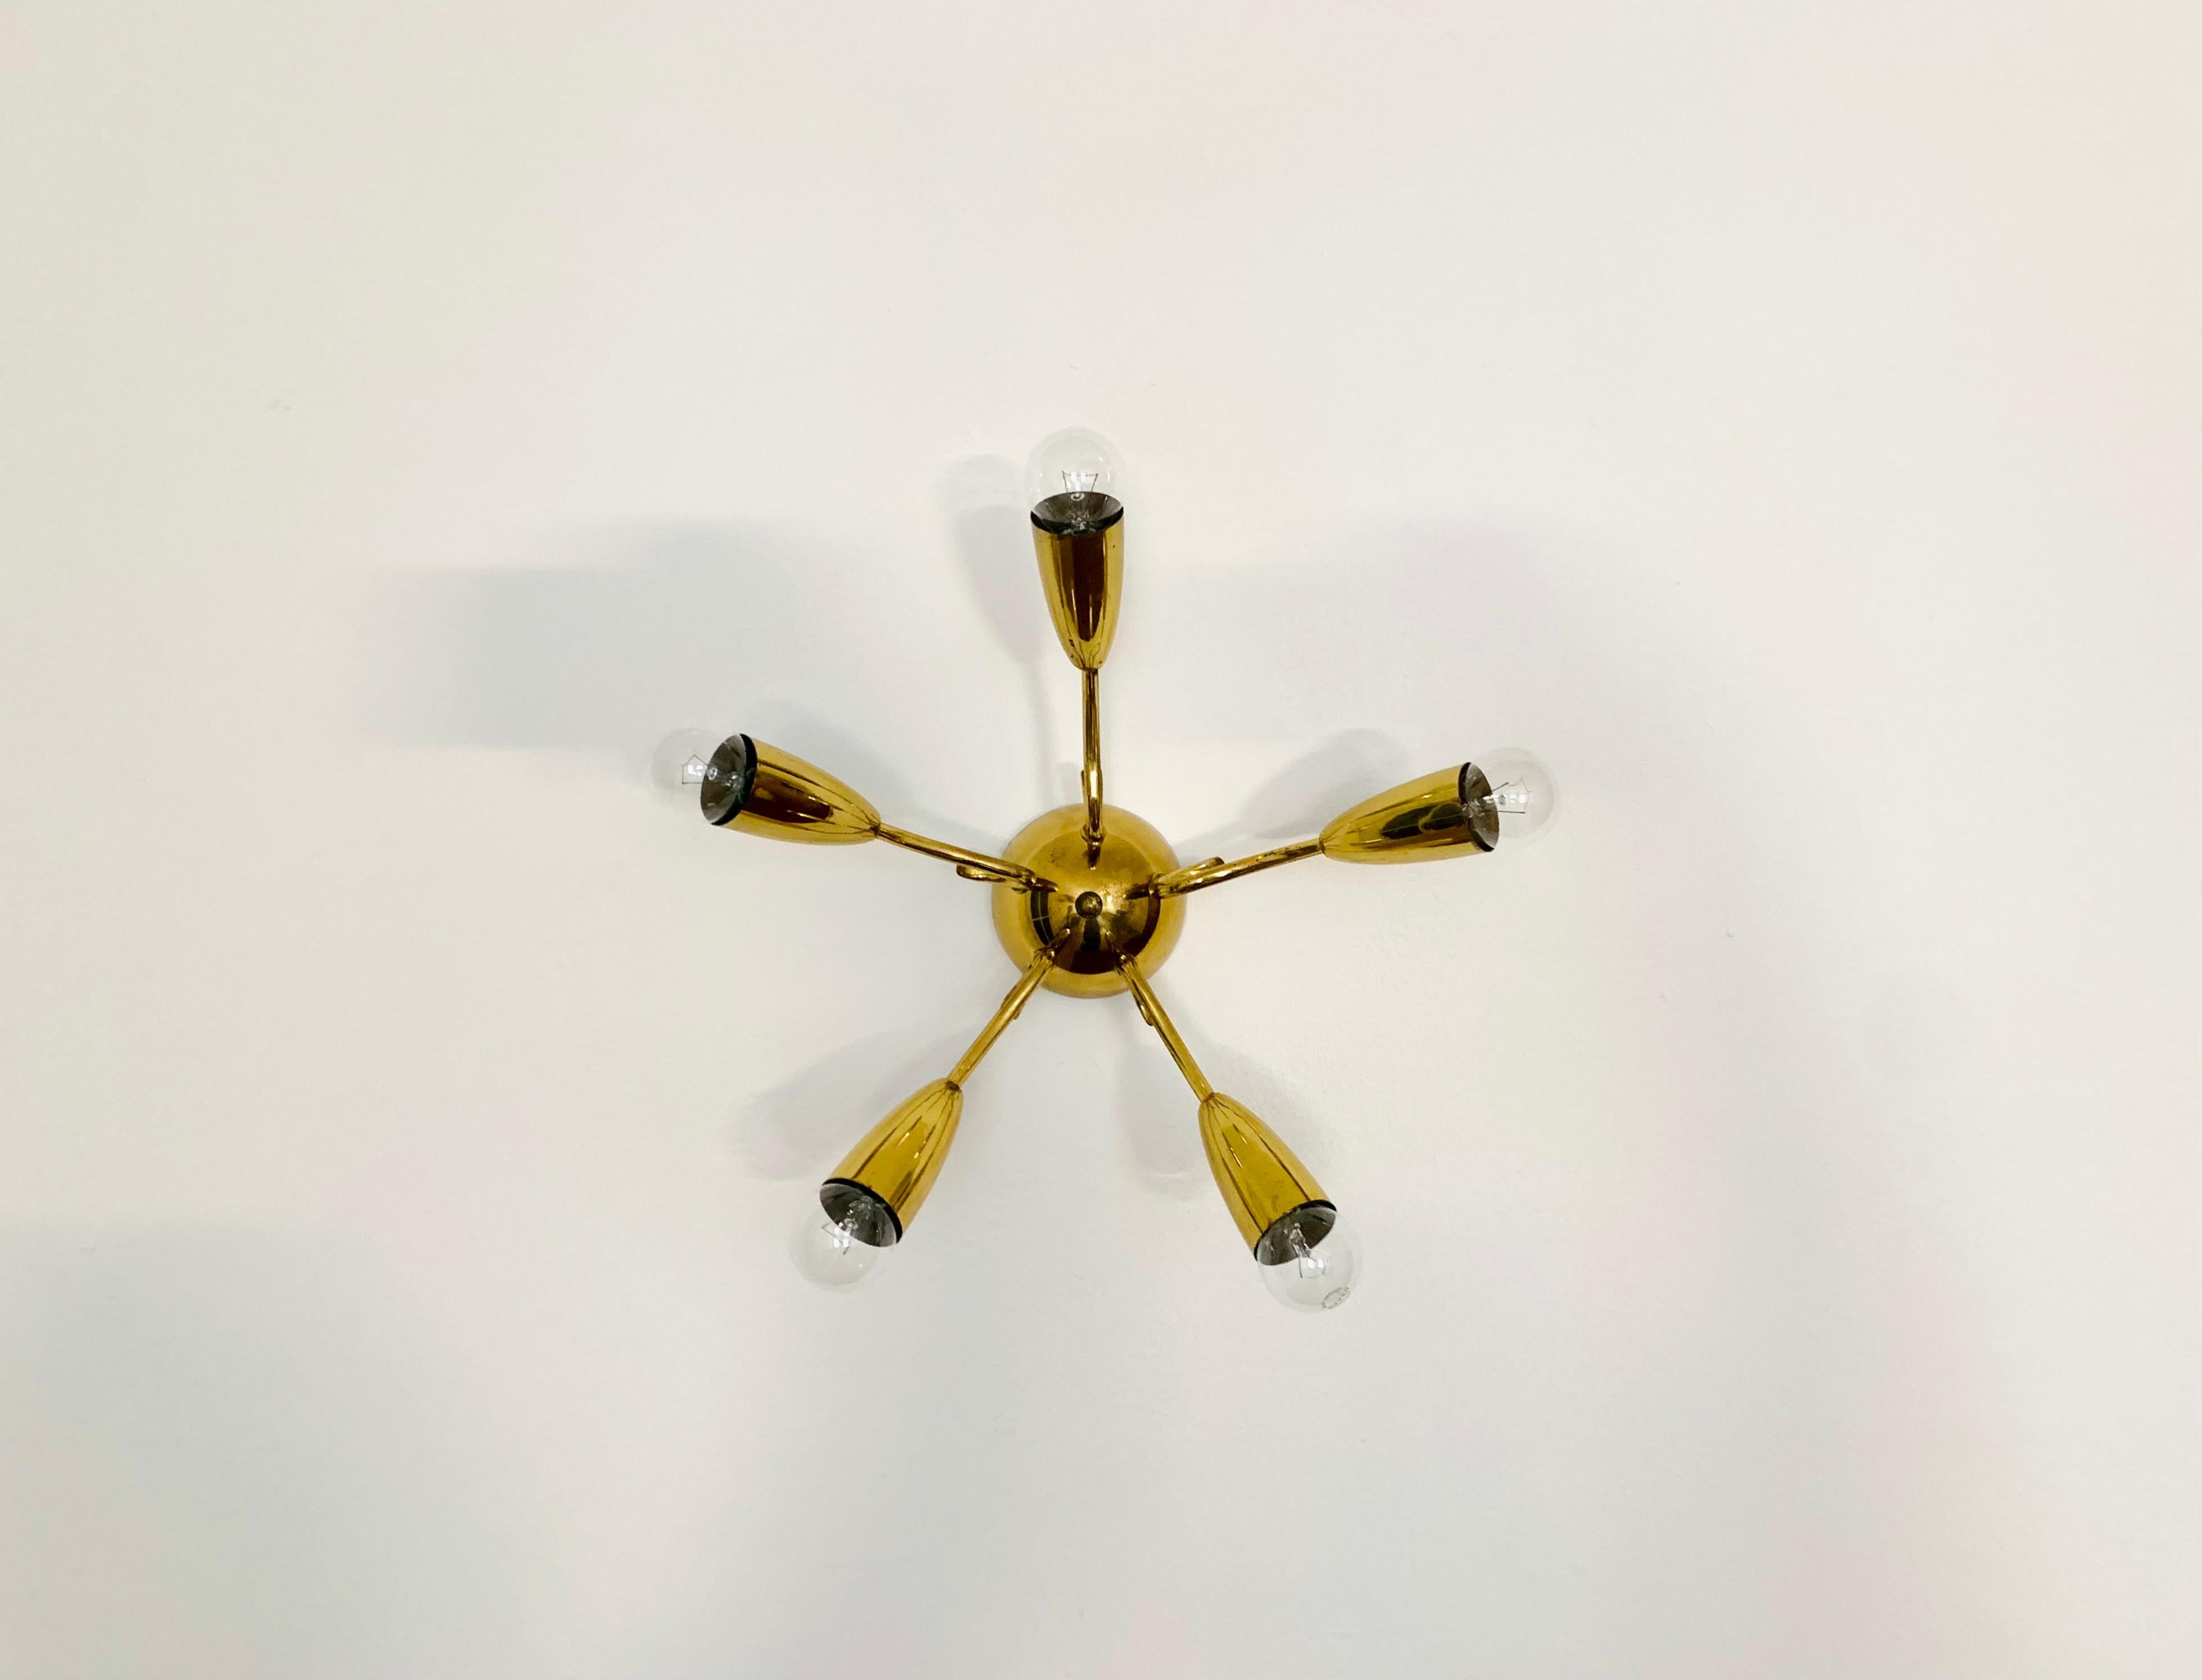 Exceptional Italian ceiling lamp from the 1950s.
Very decorative and high-quality workmanship.
Wonderful design and an asset to any home.

Condition:

Very good vintage condition with slight signs of age-related wear.
The metal parts are beautifully